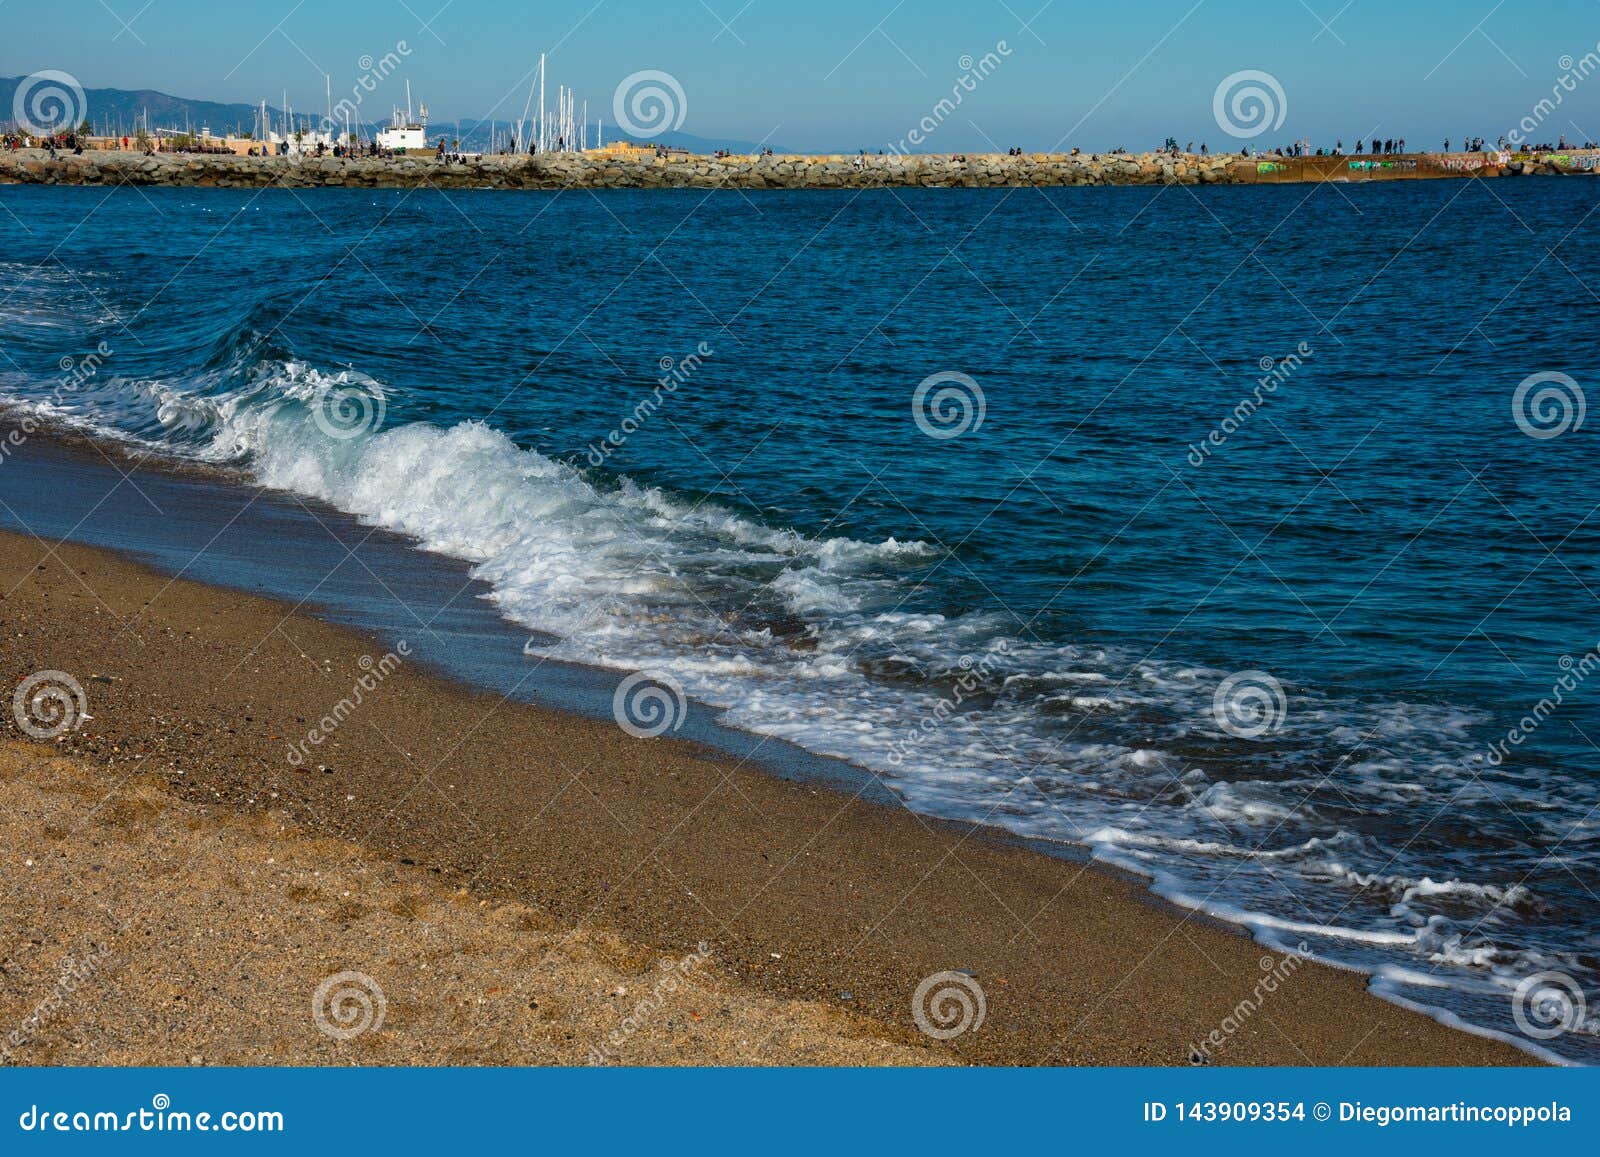 view of la barceloneta beach on a sunny and hot winter day